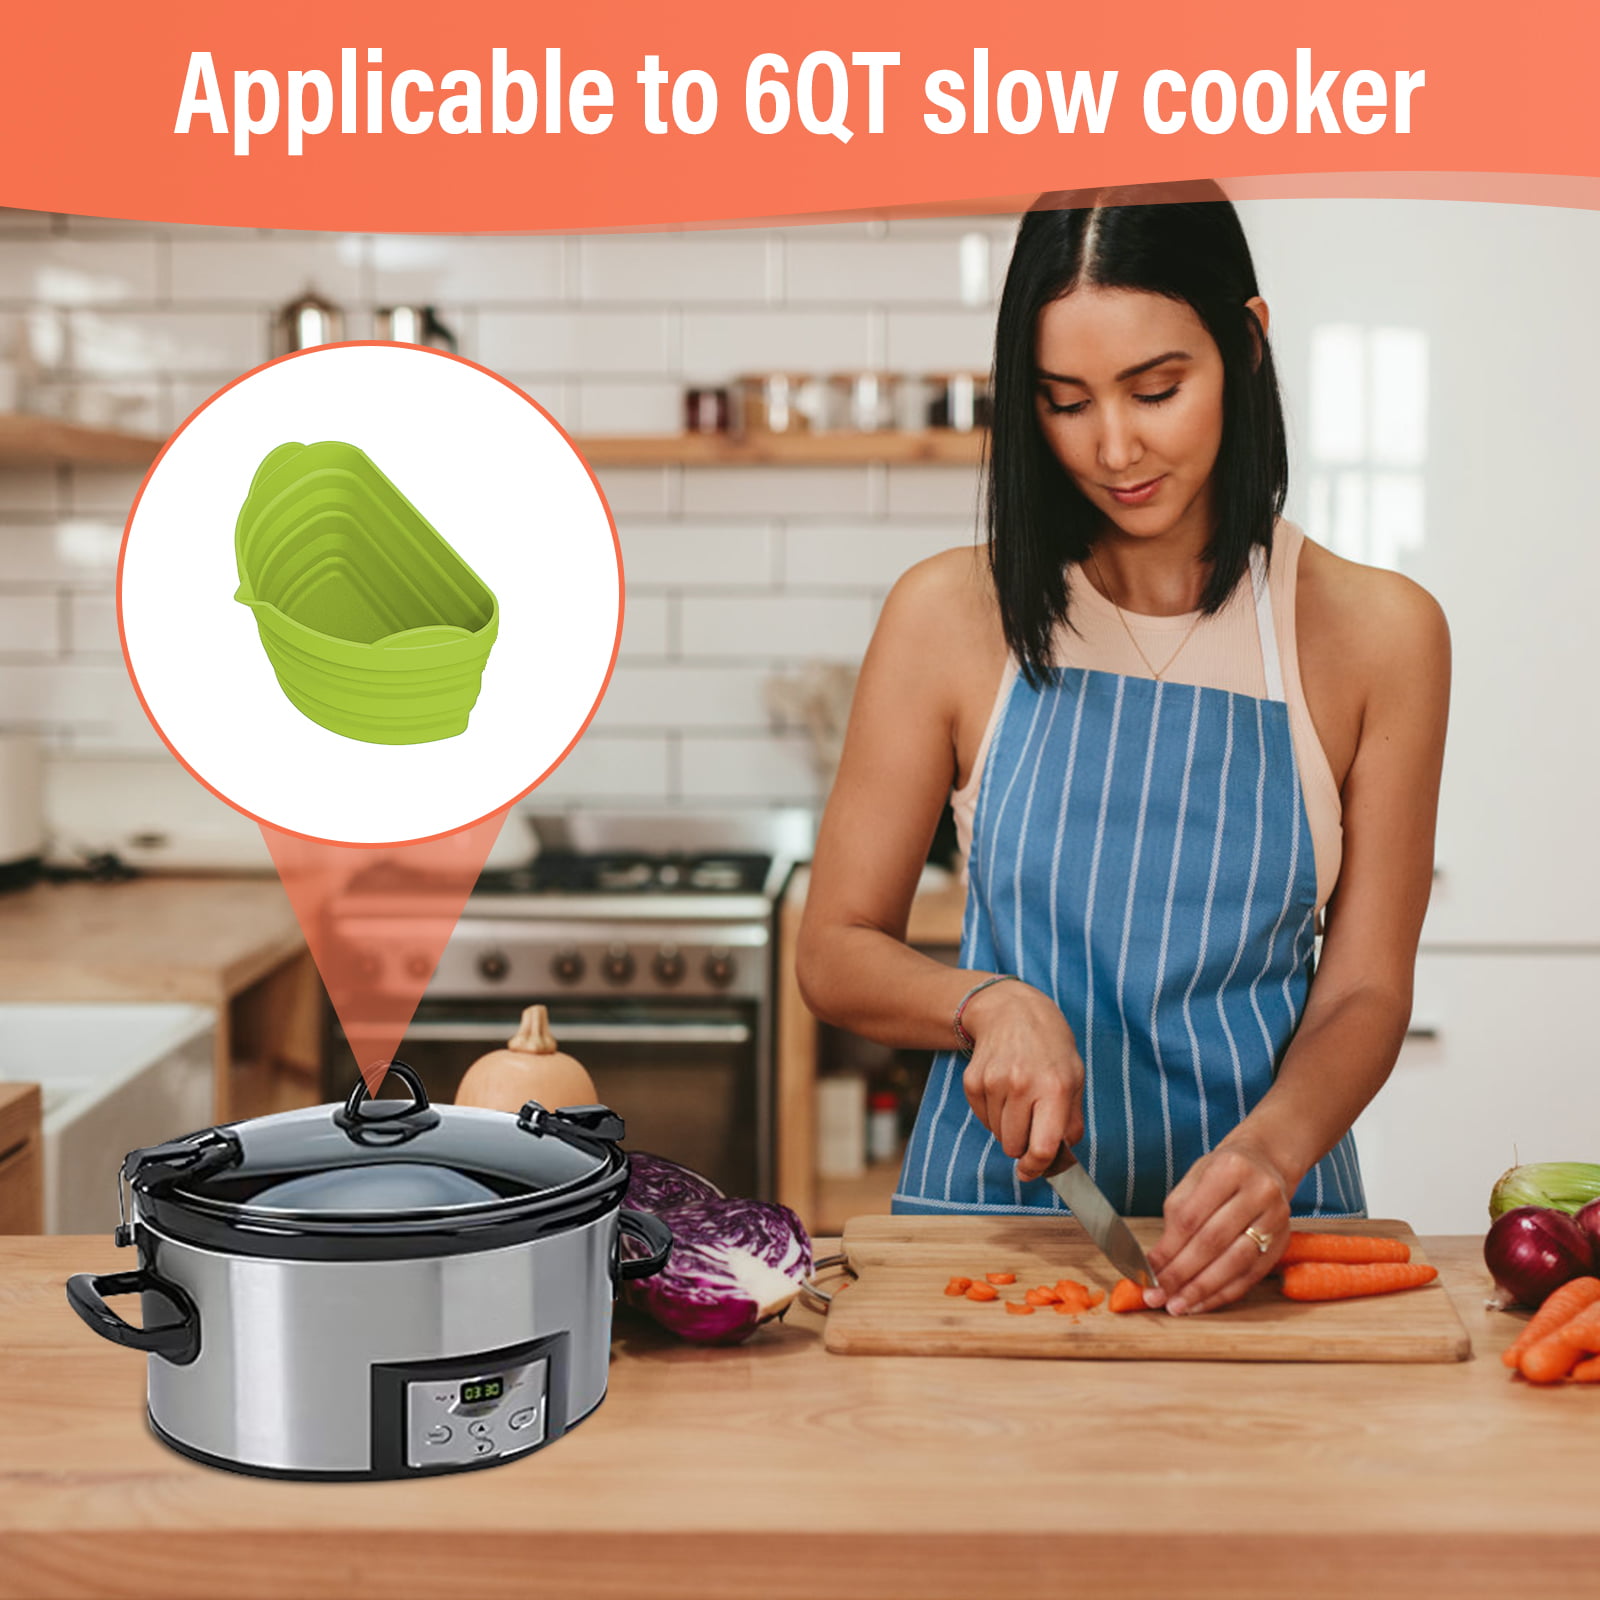 FROVEN Slow Cooker Divider 4 qt Compatible Silicone Crock Pot Liner Oval Shape, Reusable Slow Cooker Liners, Leakproof & Dish